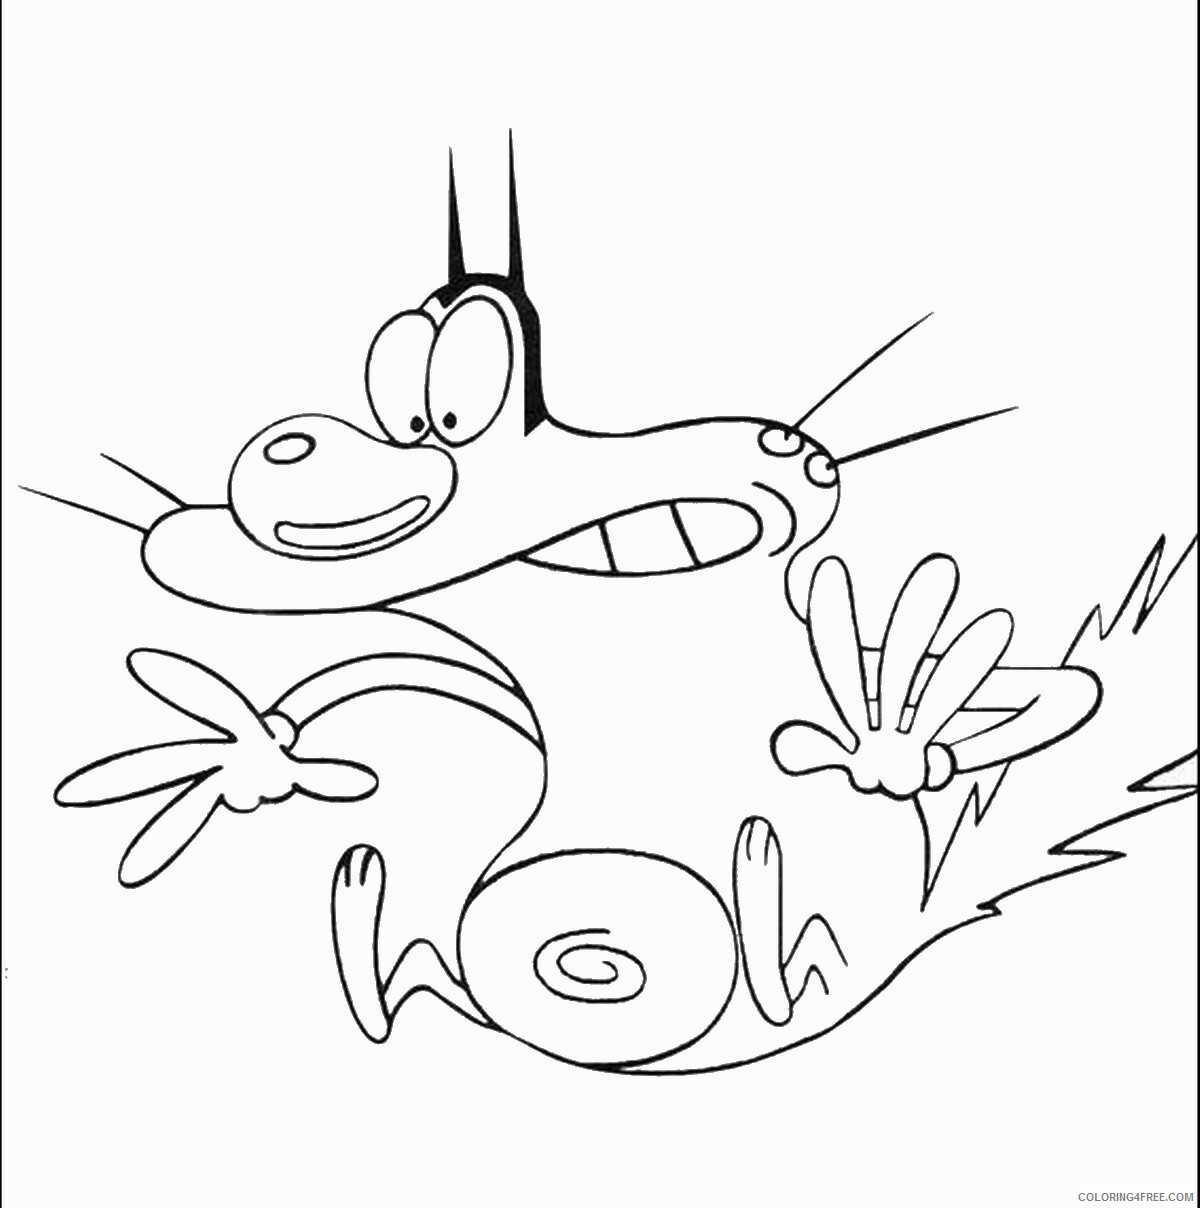 Oggy and the Cockroaches Coloring Pages TV Film Printable 2020 05612 Coloring4free